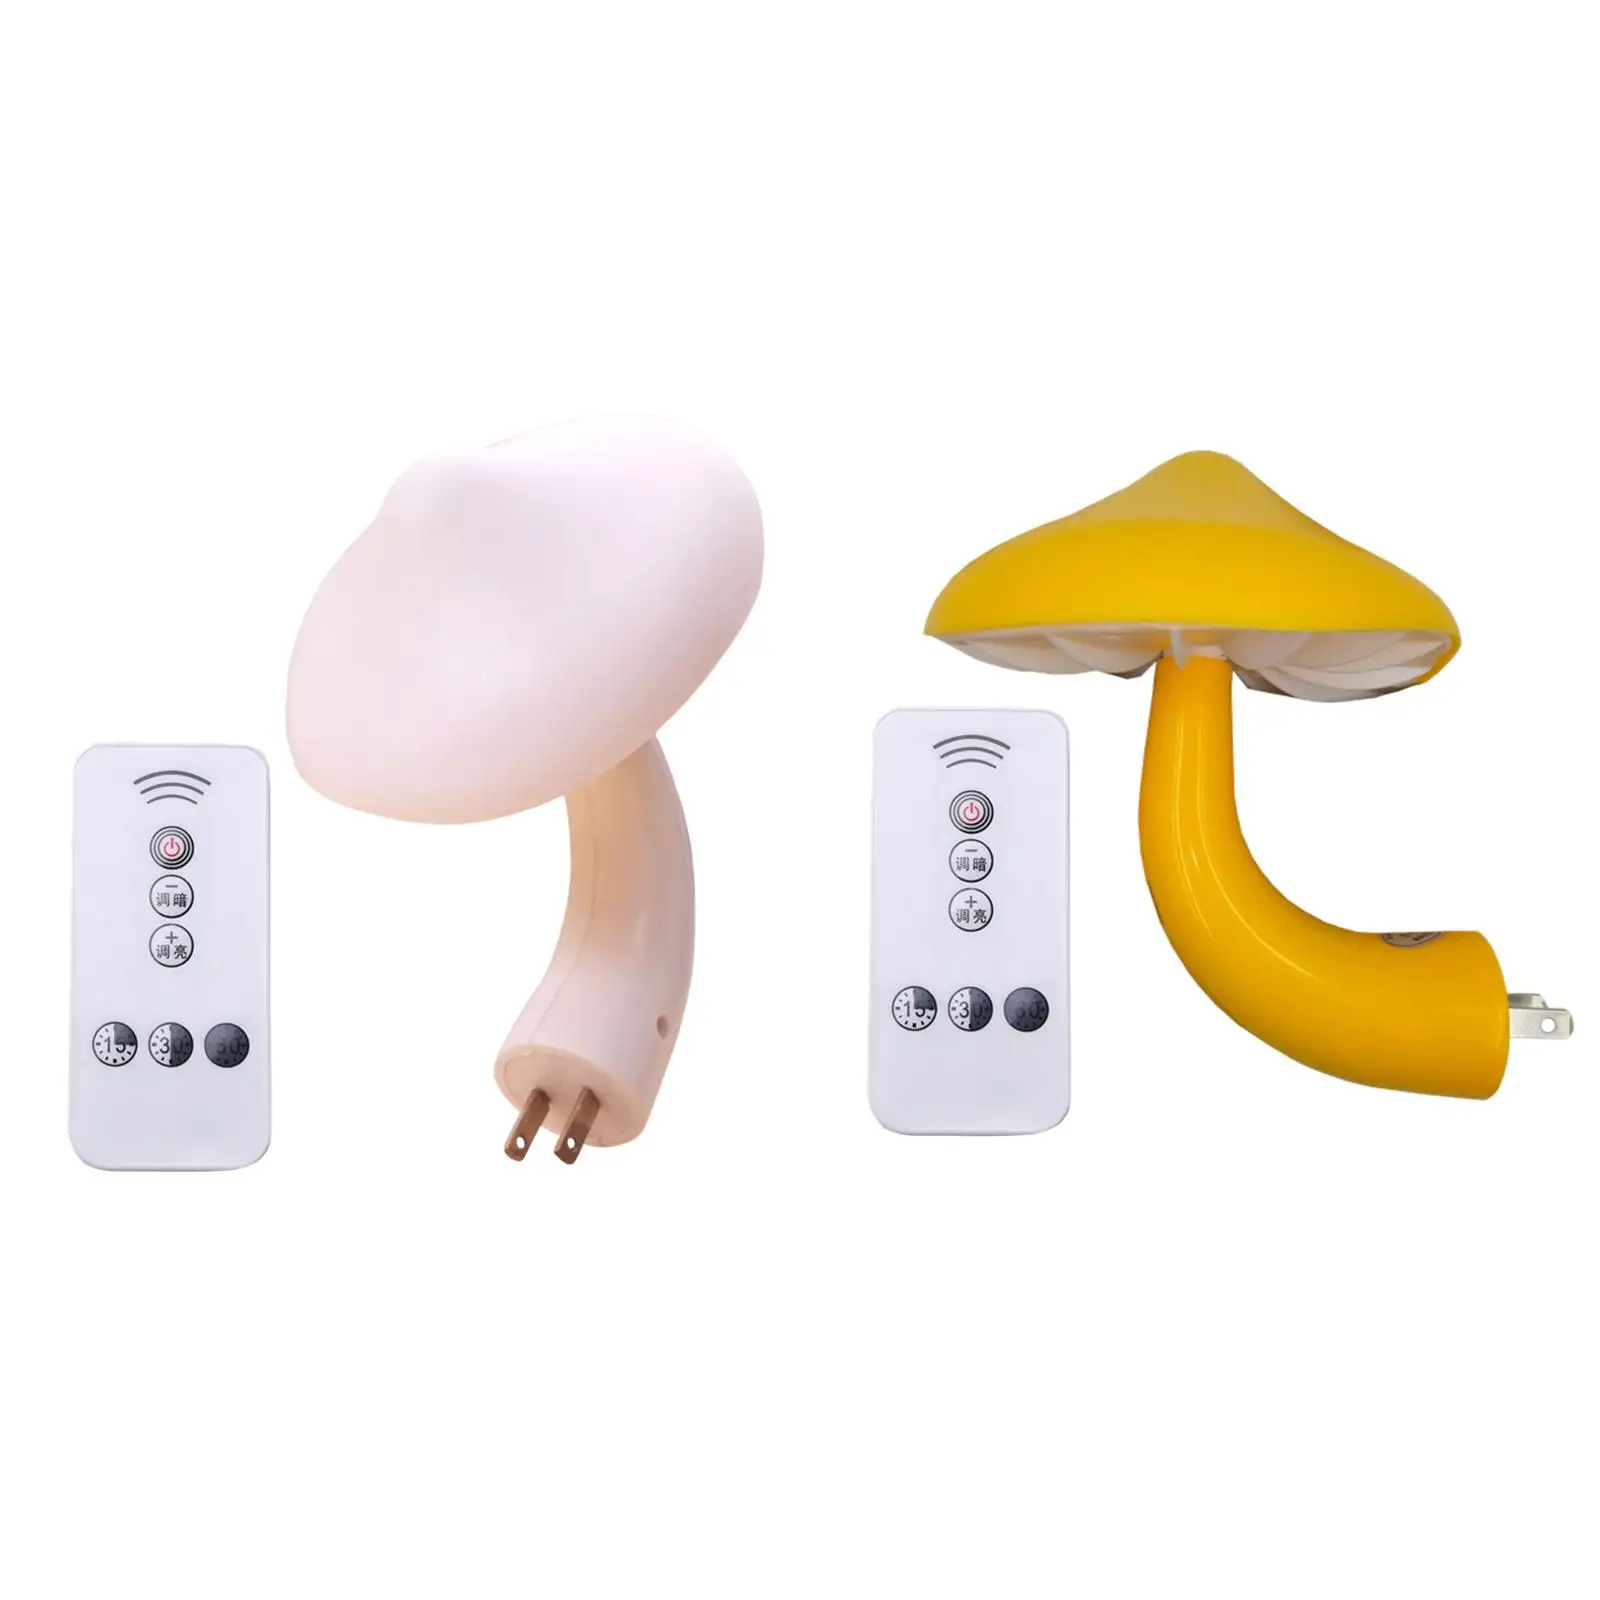 

Mushroom Lamp Plug in Wall Sconce Fixtures Farmhouse Dimmable Hallway LED Night Light, for Kitchen Children Kids Room Boy Girls